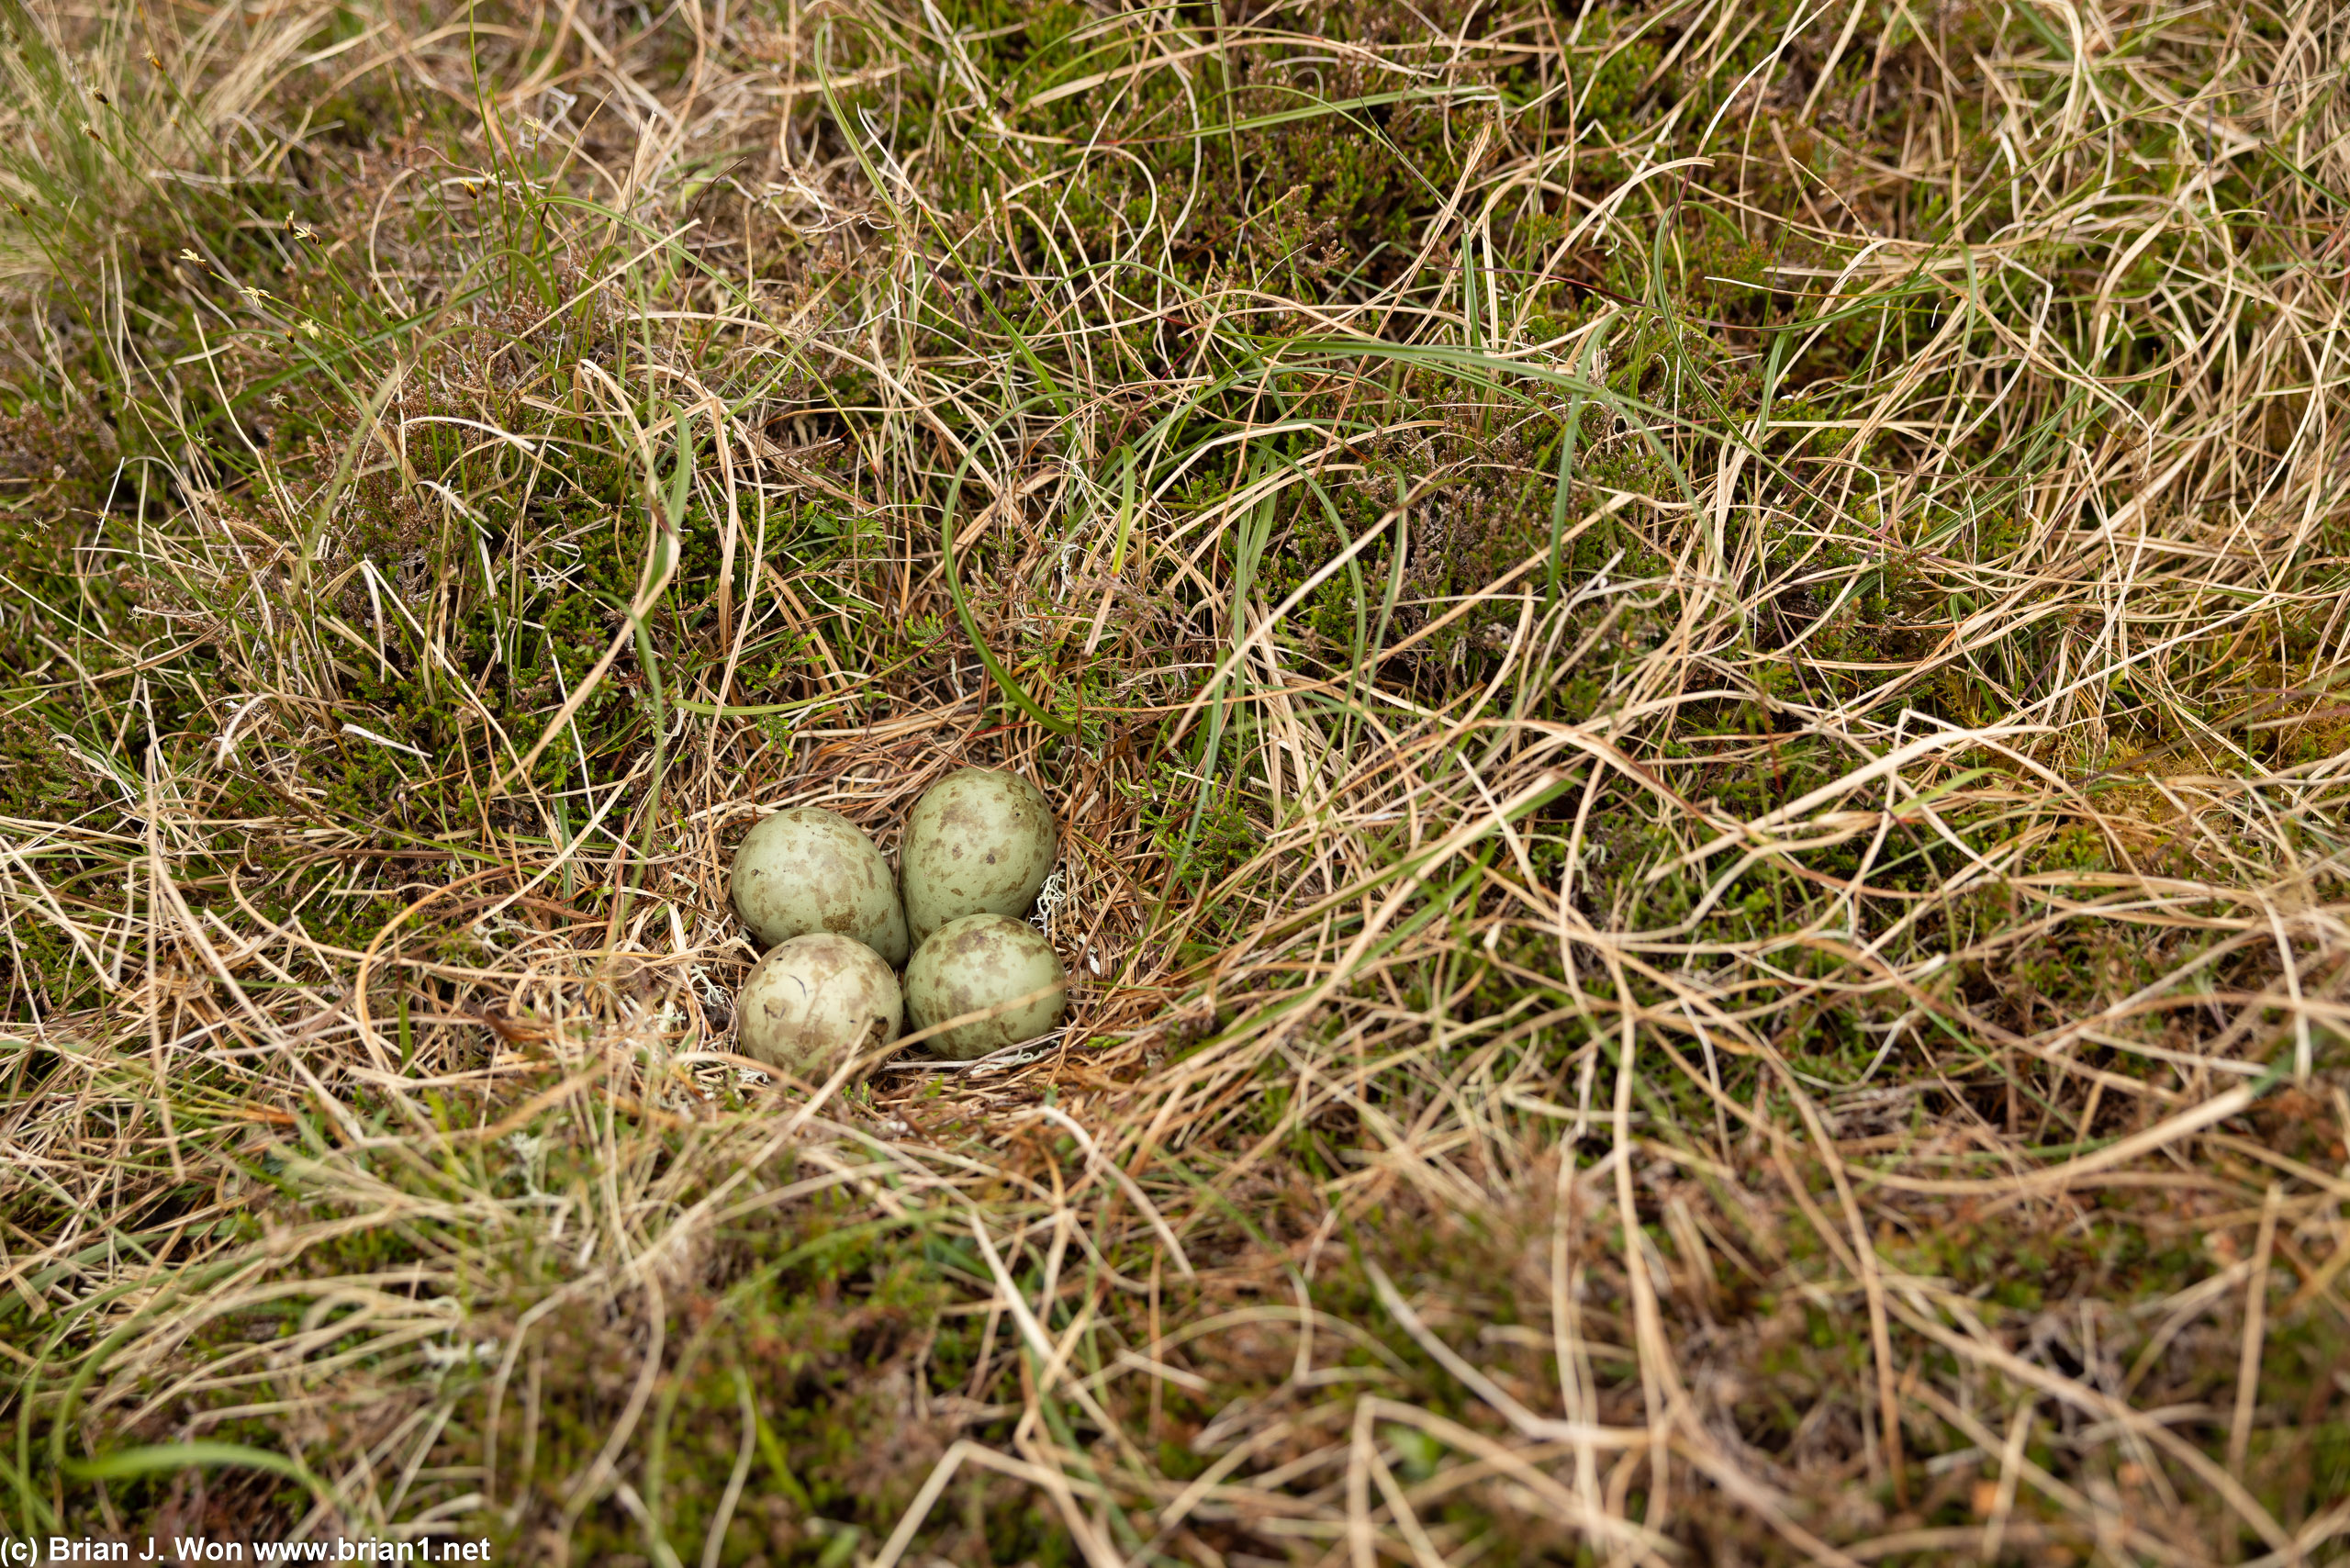 Found a nest in the tall grass.